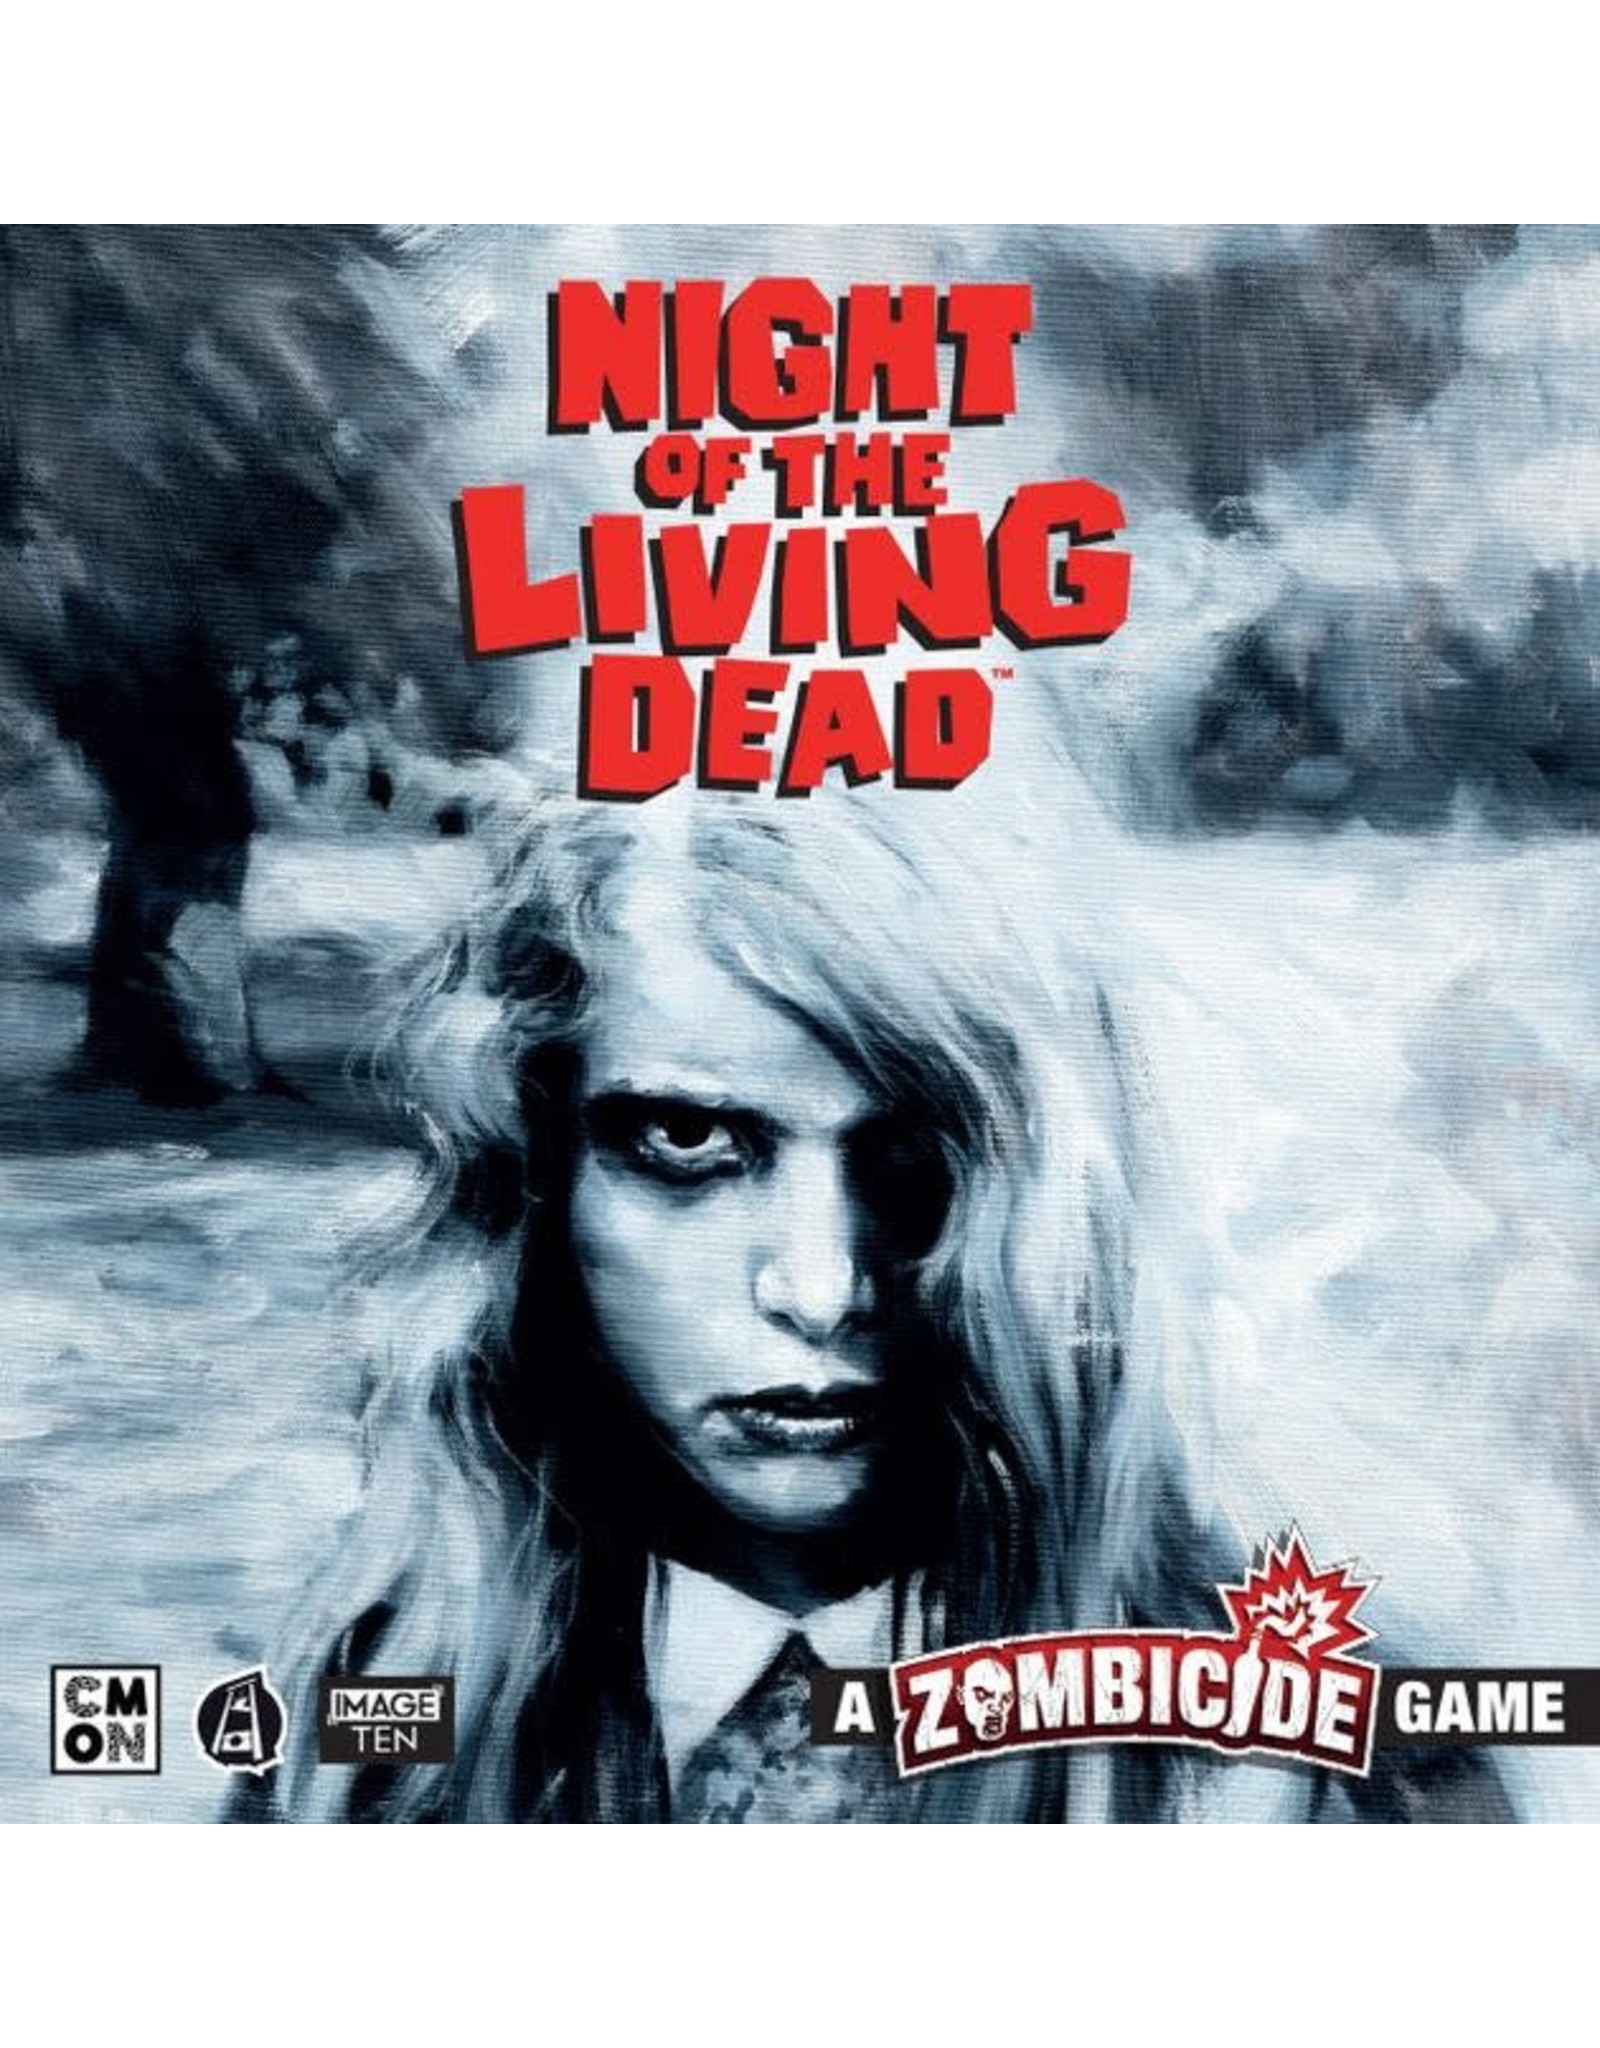 CMON Zombiecide - Night of the Living Dead